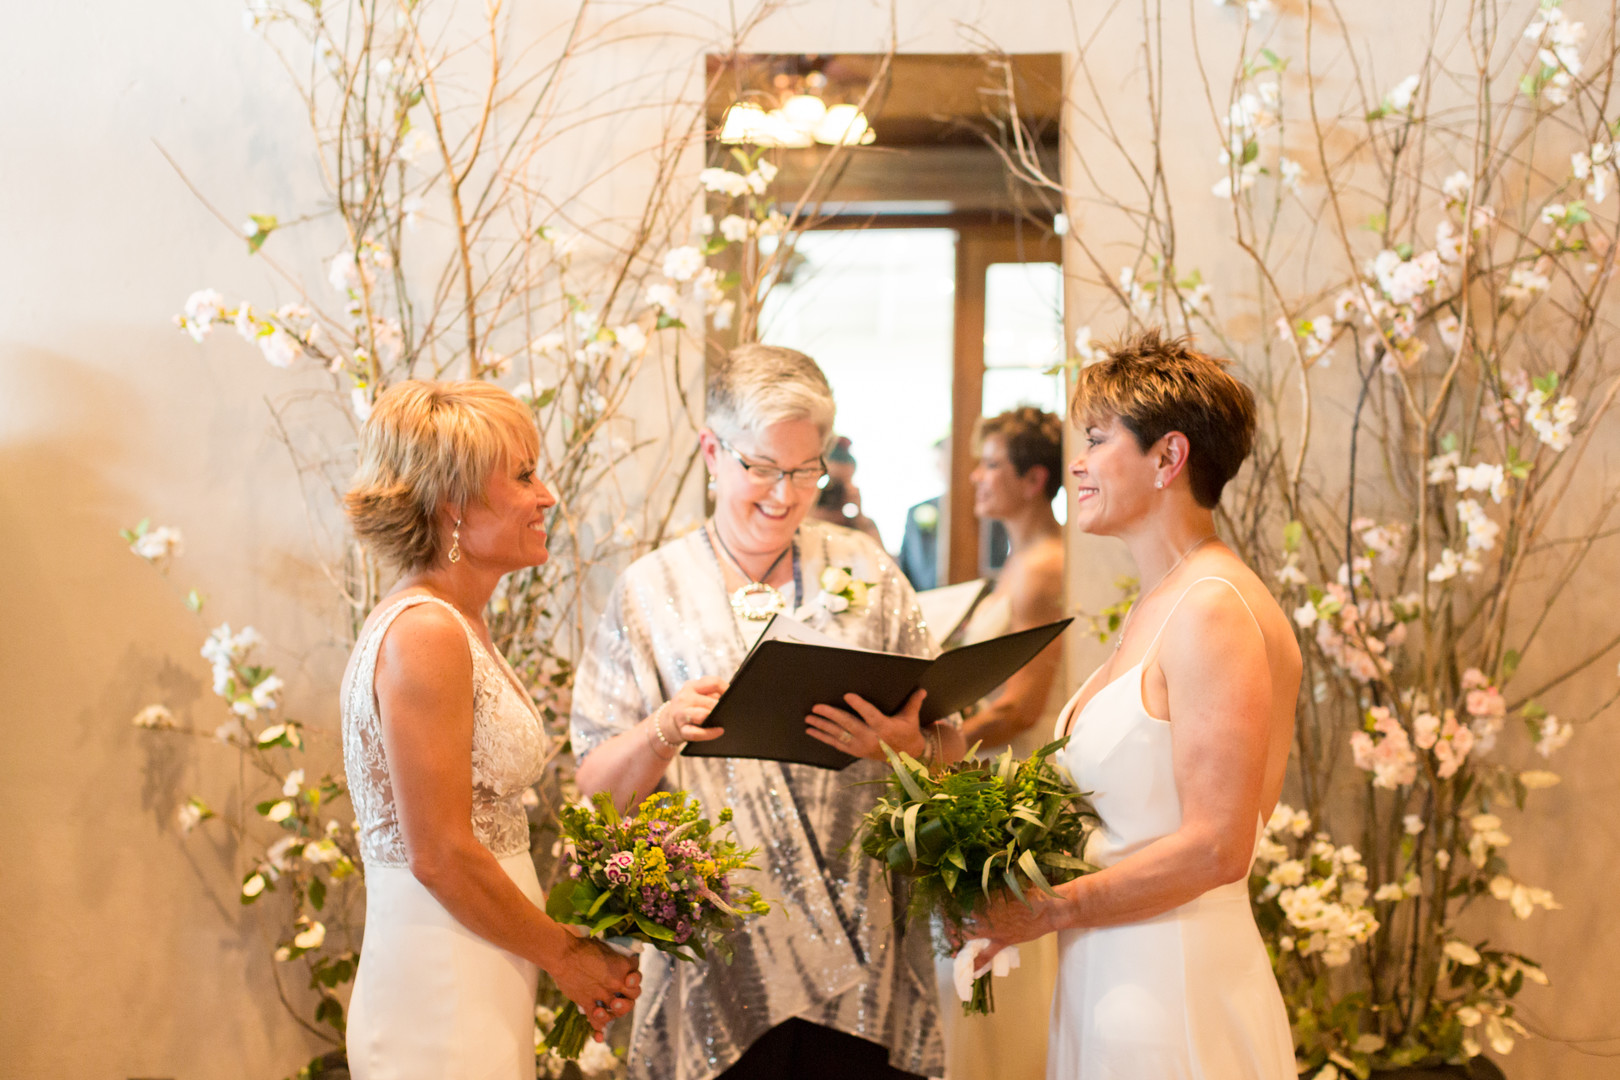 Intimate spring restaurant wedding in Newberry, South Carolina LGBTQ+ weddings two brides white dresses small wedding vows